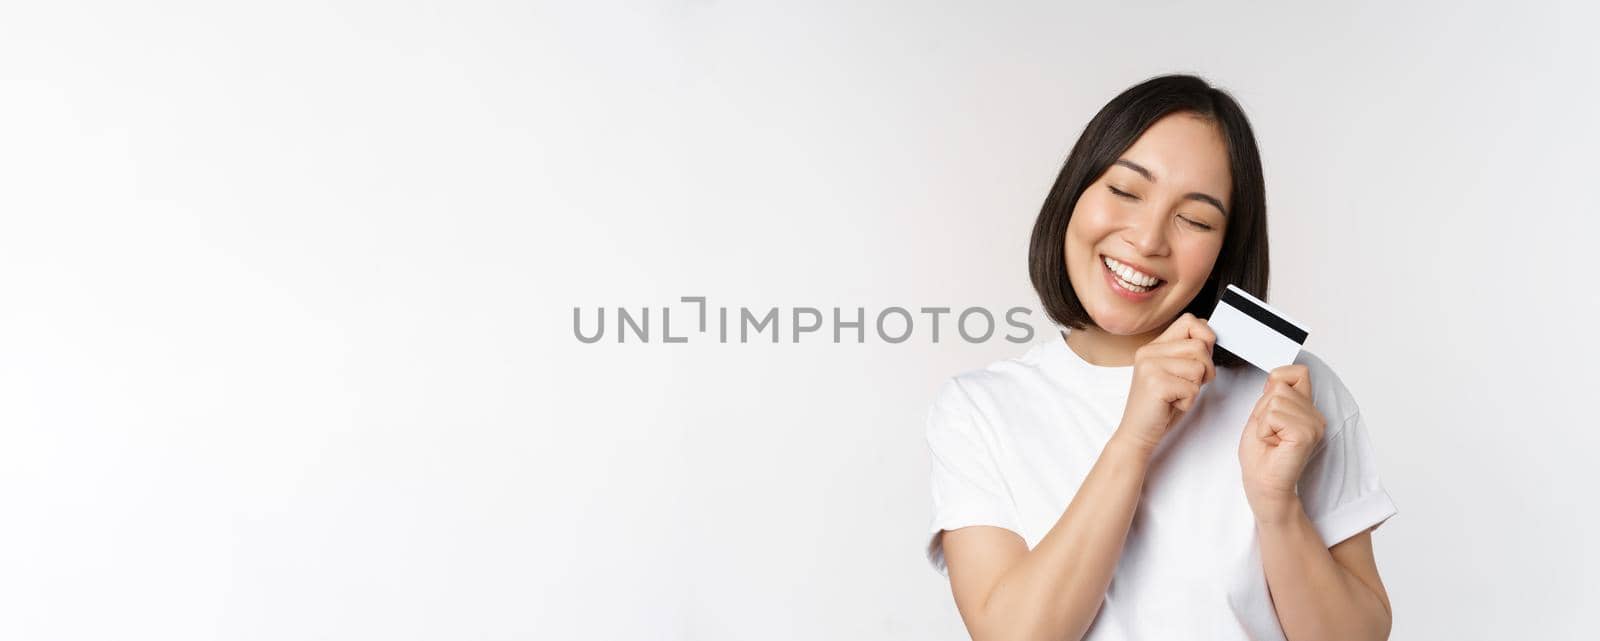 Image of smiling asian woman hugging credit card, buying contactless, standing in white tshirt over white background. Copy space